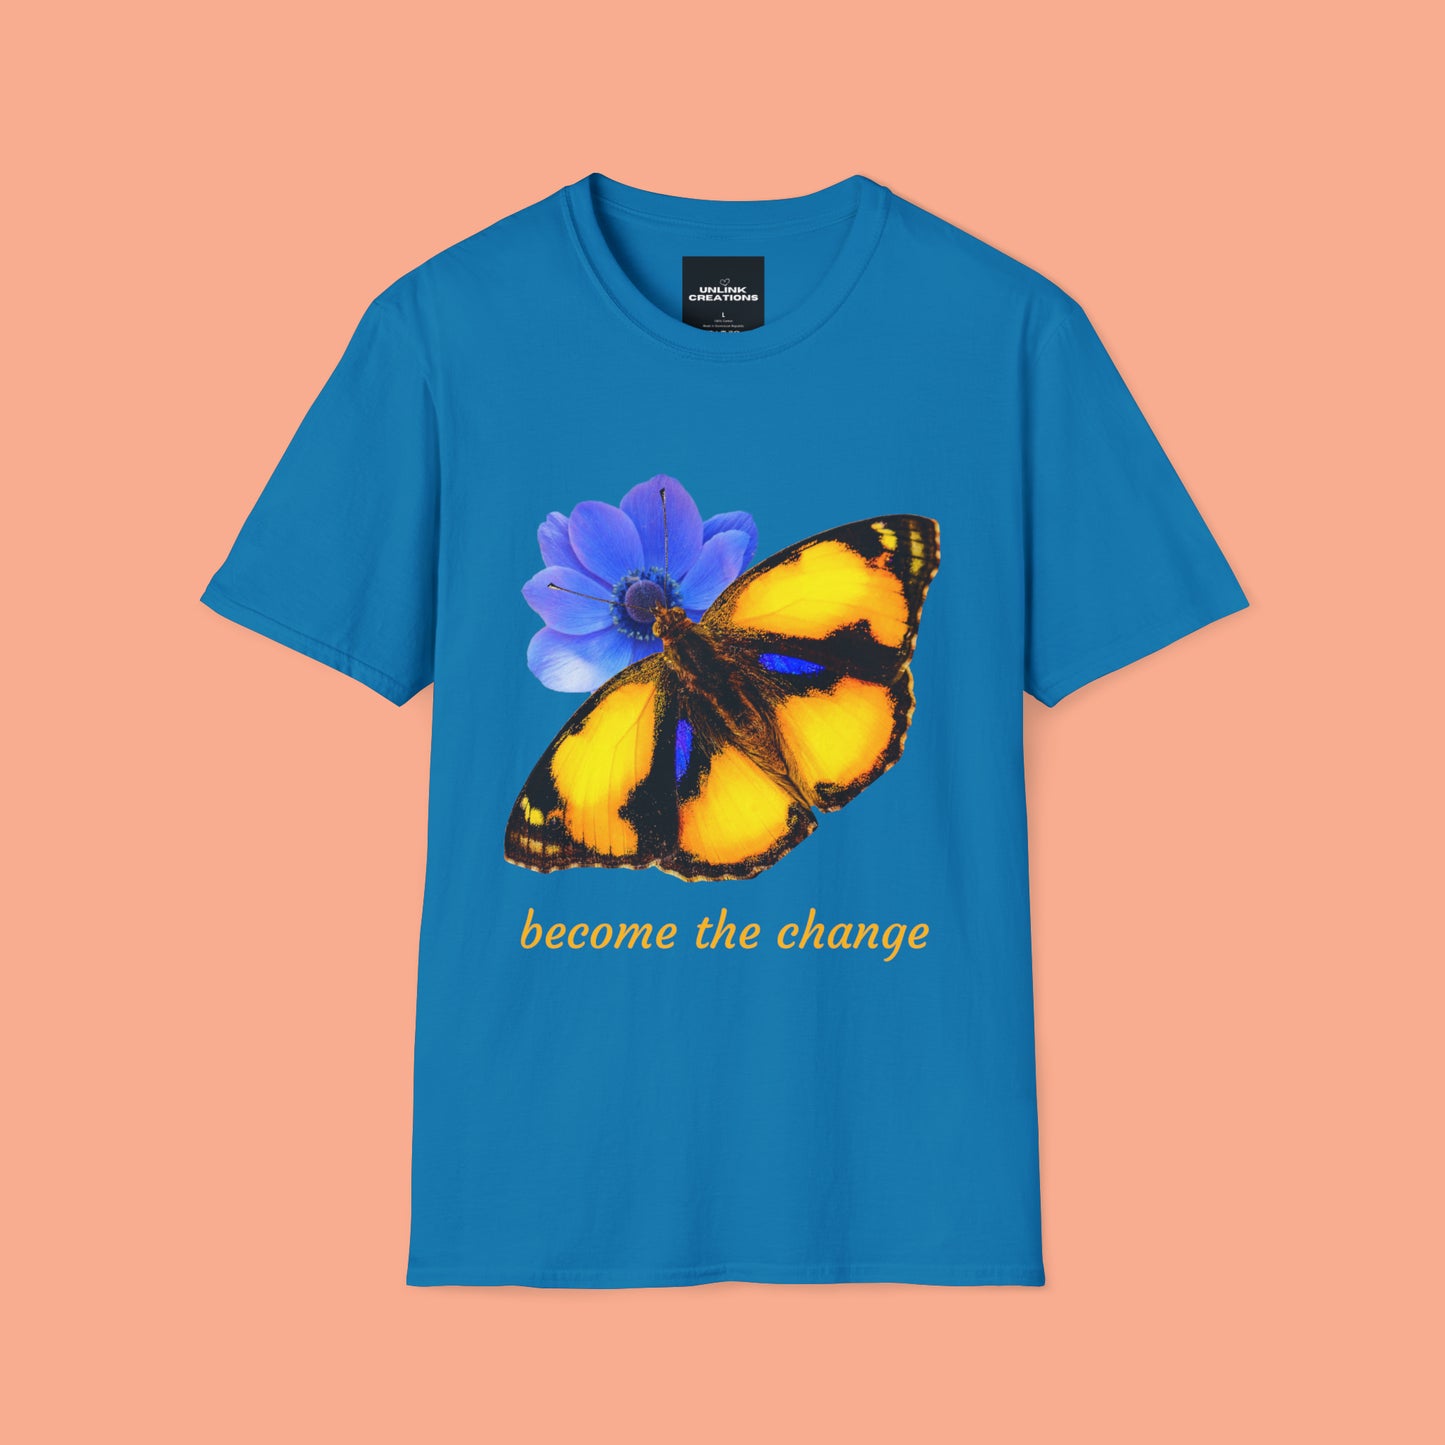 Beautiful “become the change" Unisex Softstyle T-Shirt butterfly design. Great as a gift or get one for yourself.